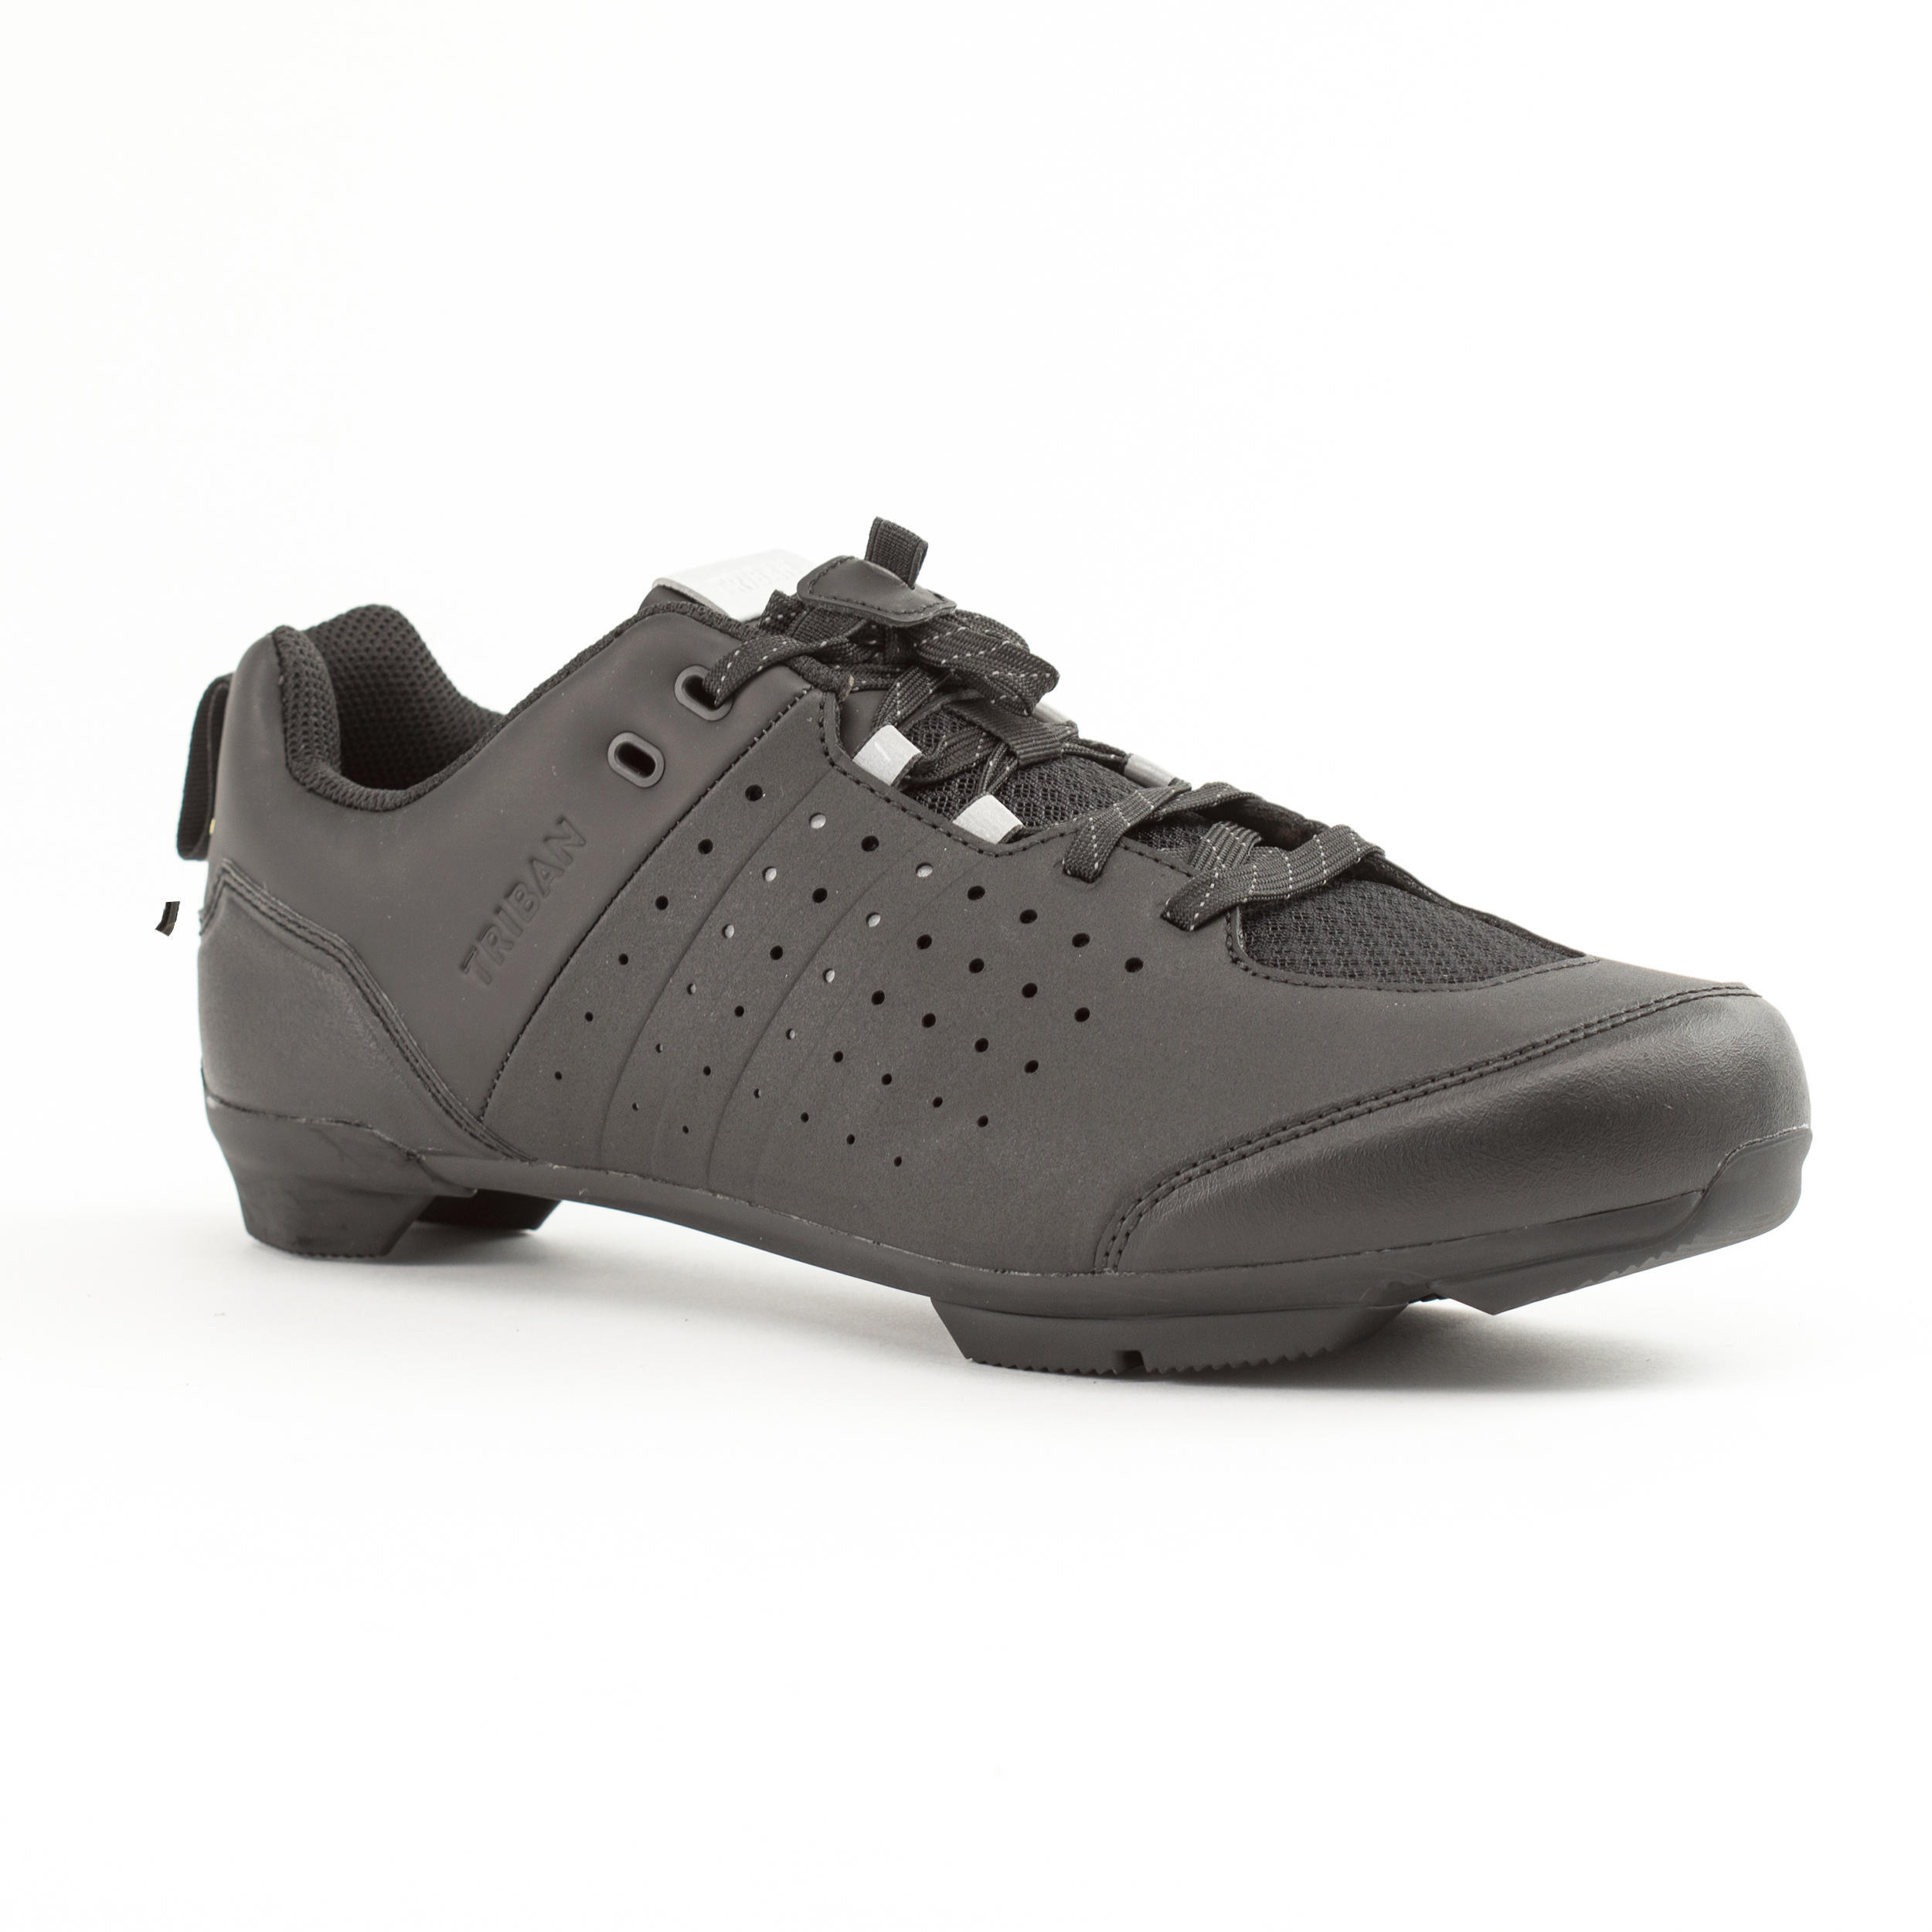 Road and Gravel Cycling Lace-Up SPD Shoes GRVL 500 - Black 1/6